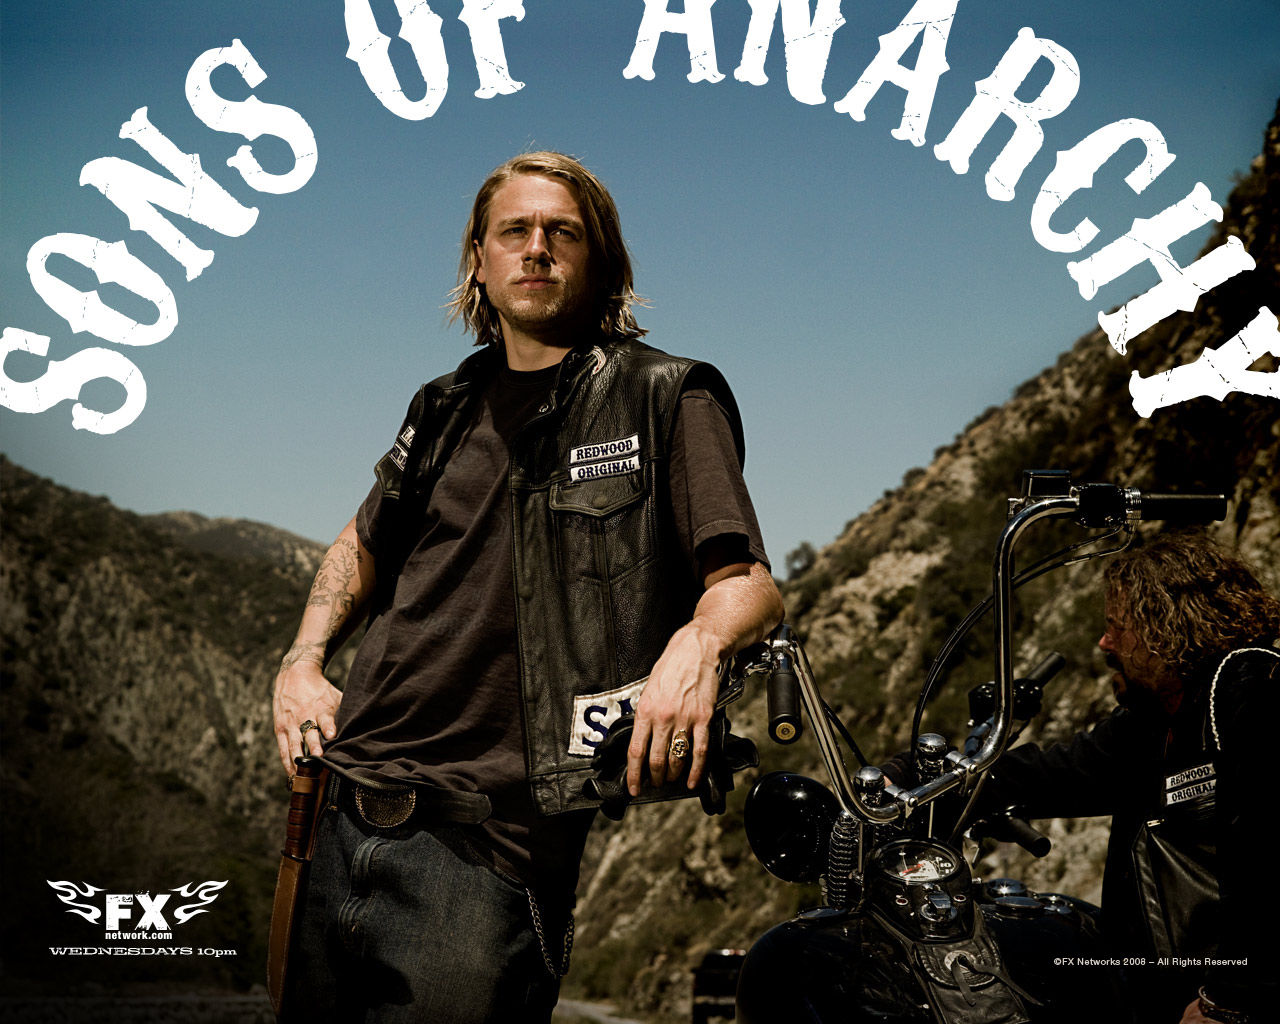 Sons of anarchy soundtrack all seasons download